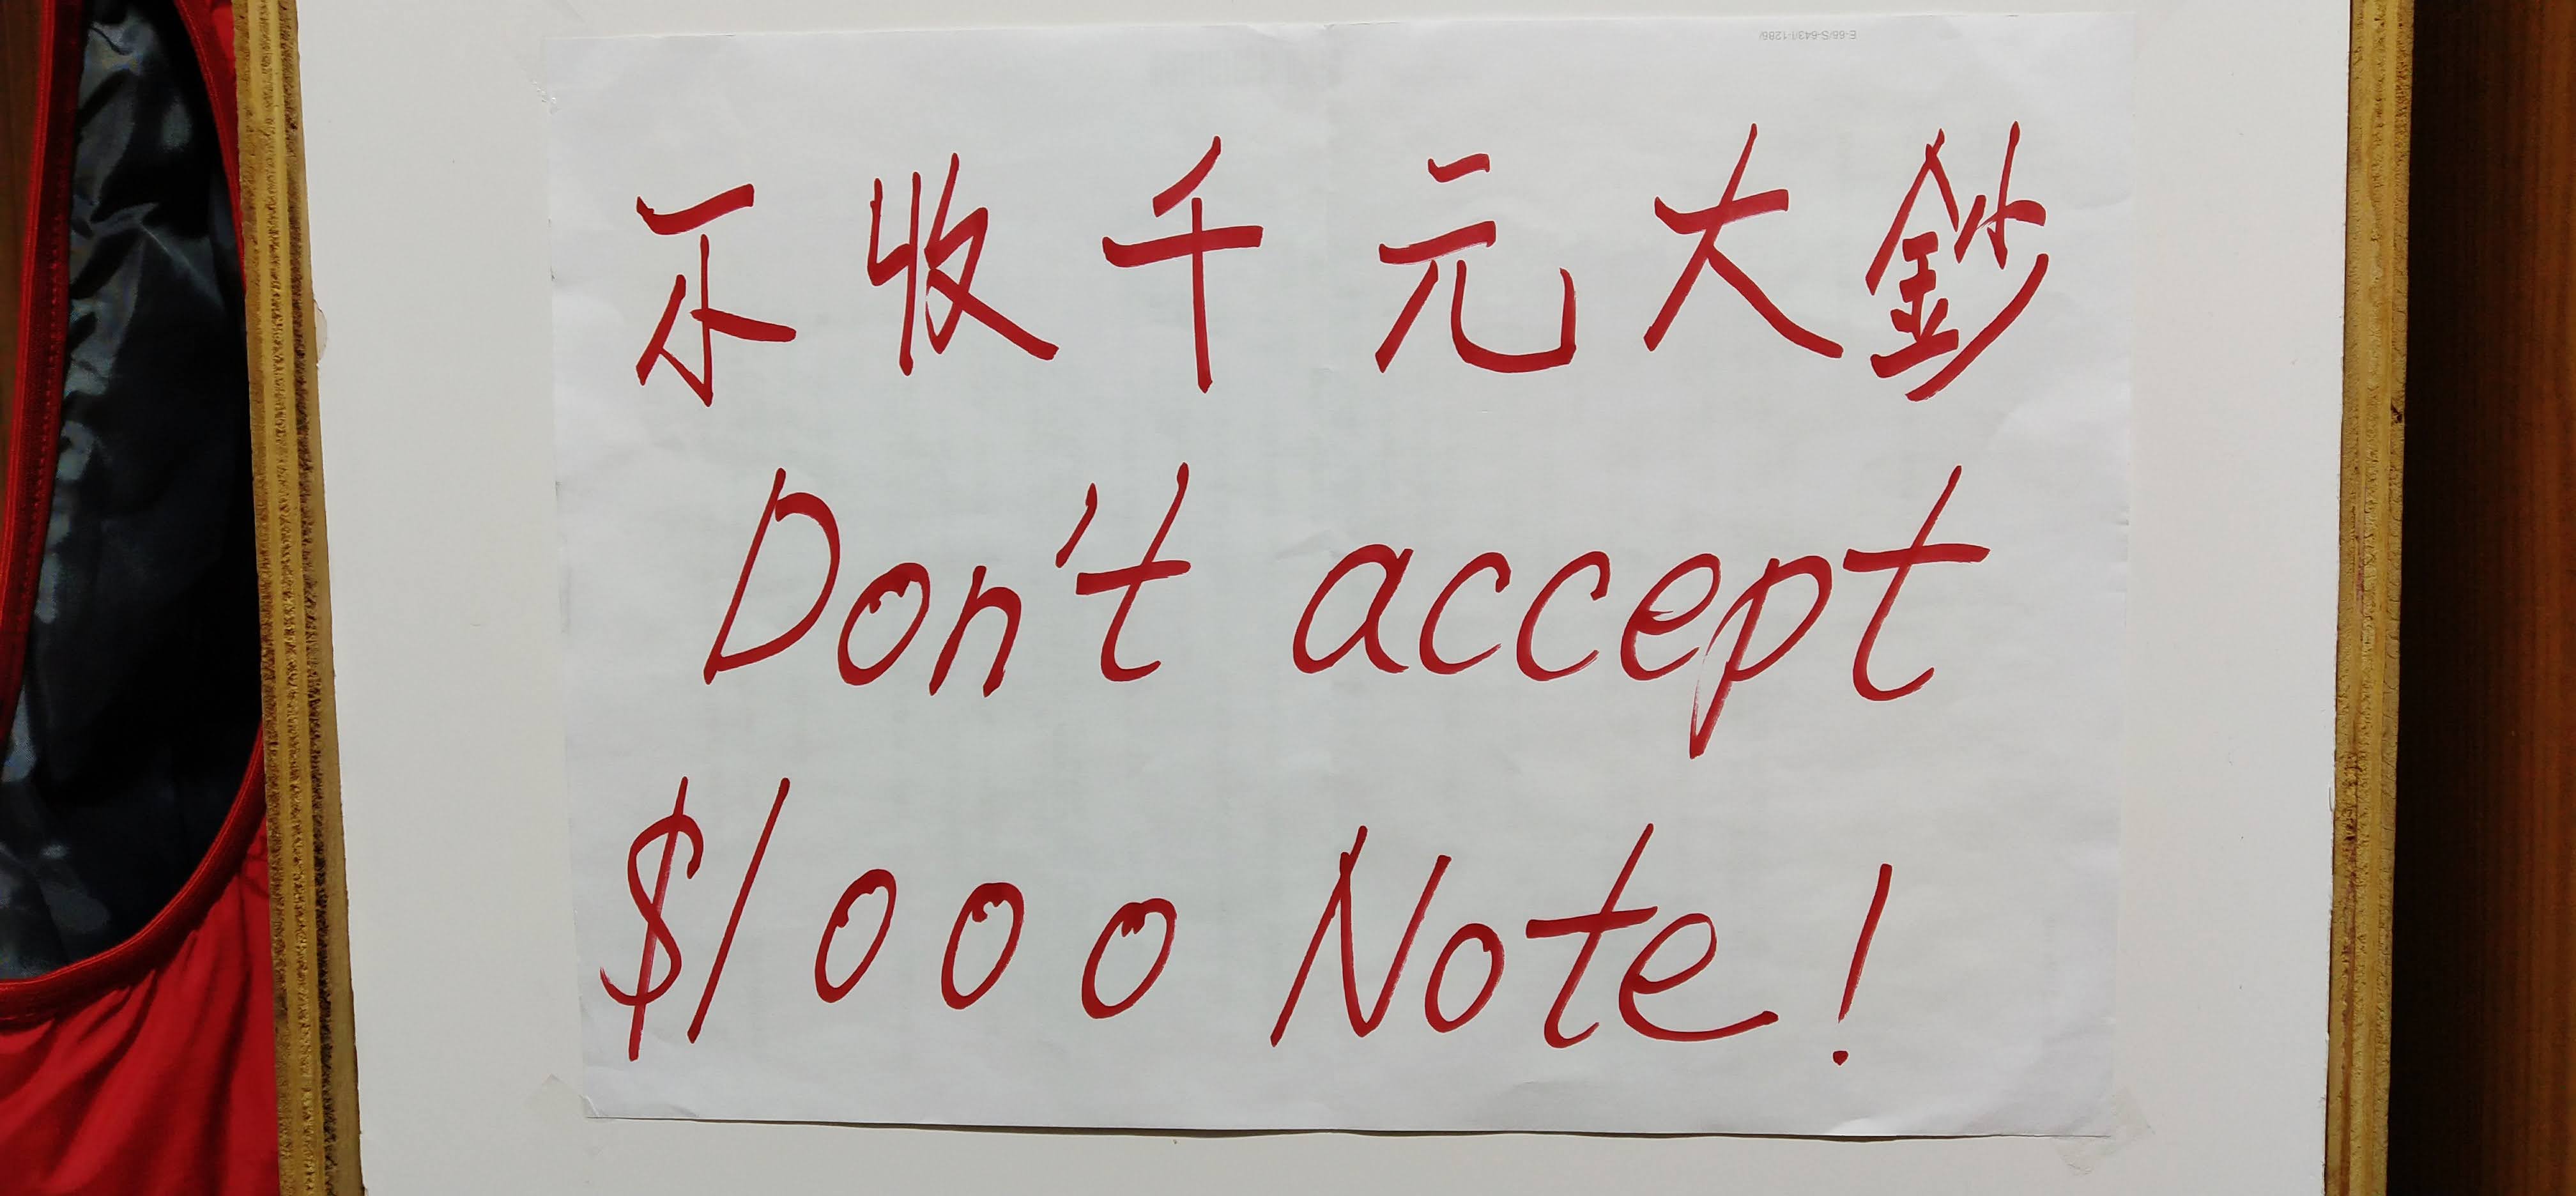 Shops and eateries in Hong Kong may not accept 1000 dollar note.